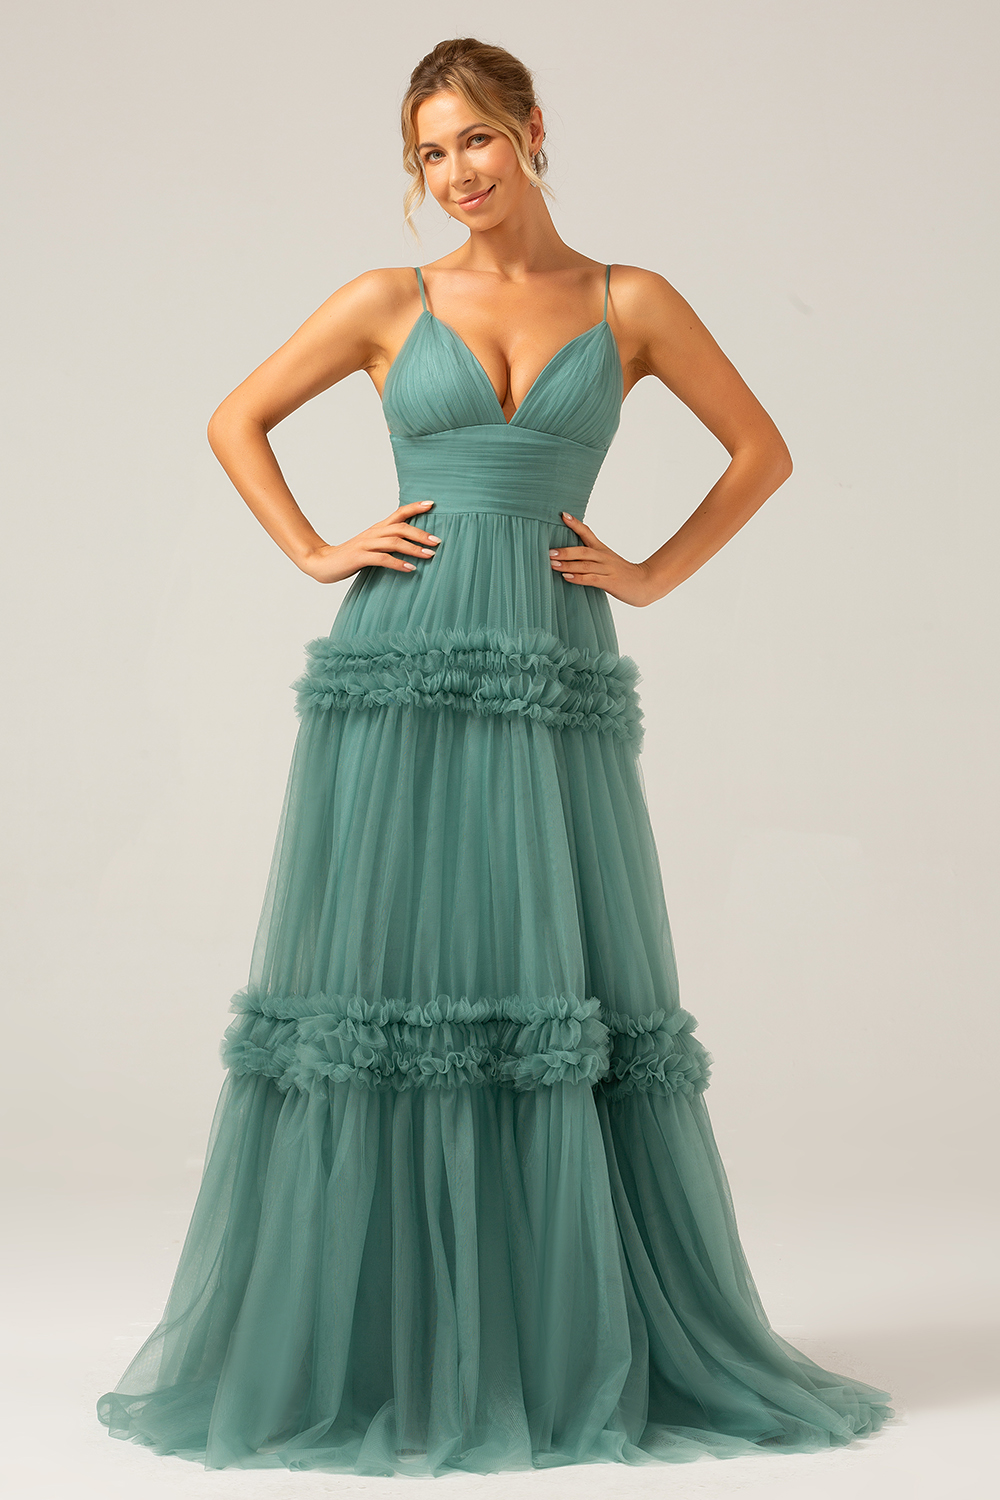 Grey Green A Line Tulle Pleated Spaghetti Straps Backless Prom Dress